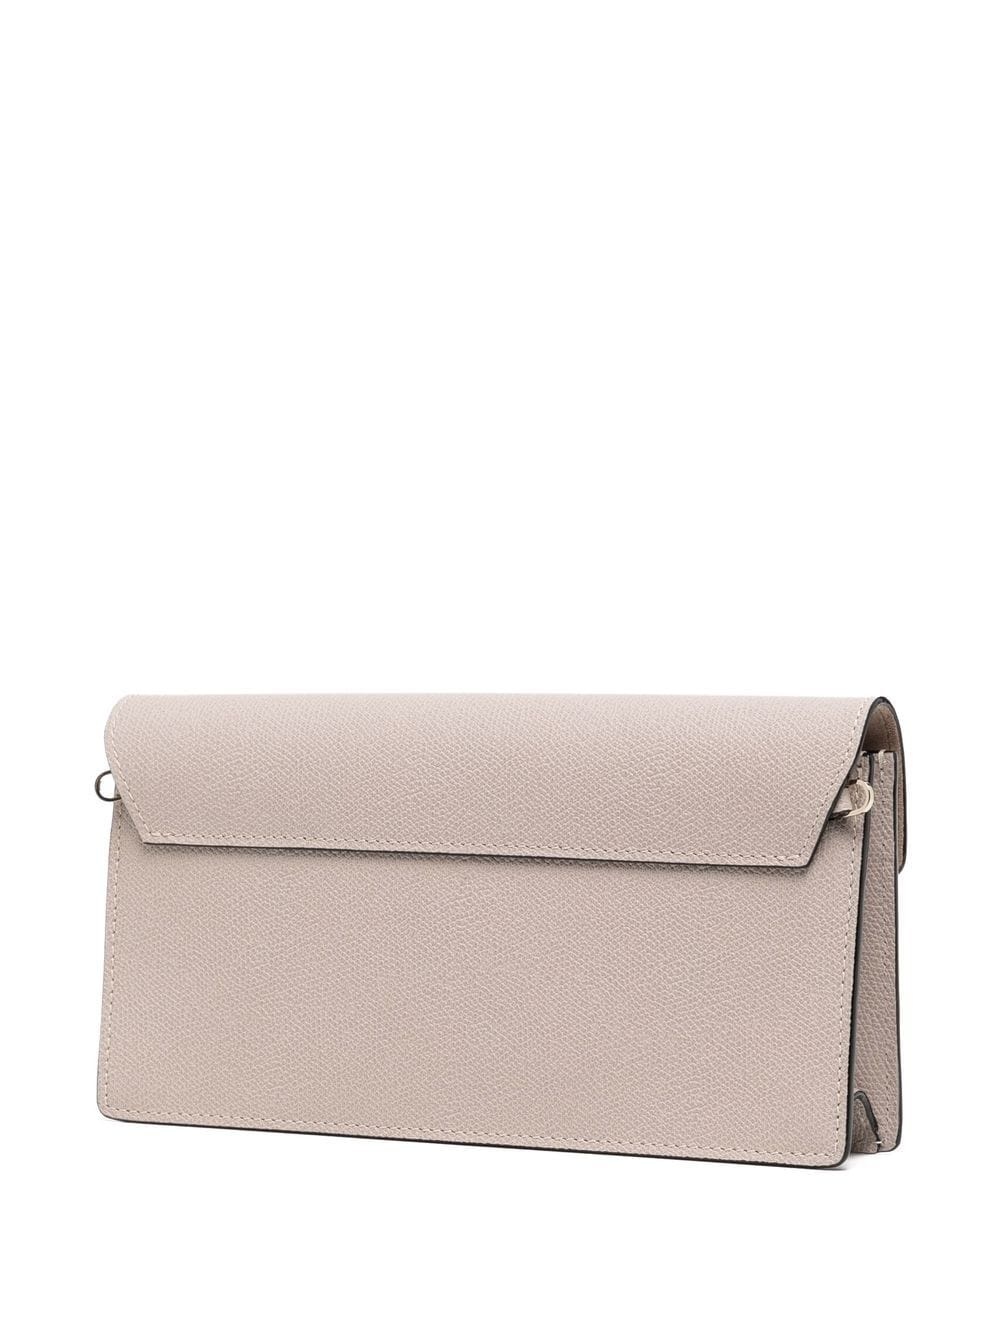 Iside leather clutch bag - 3